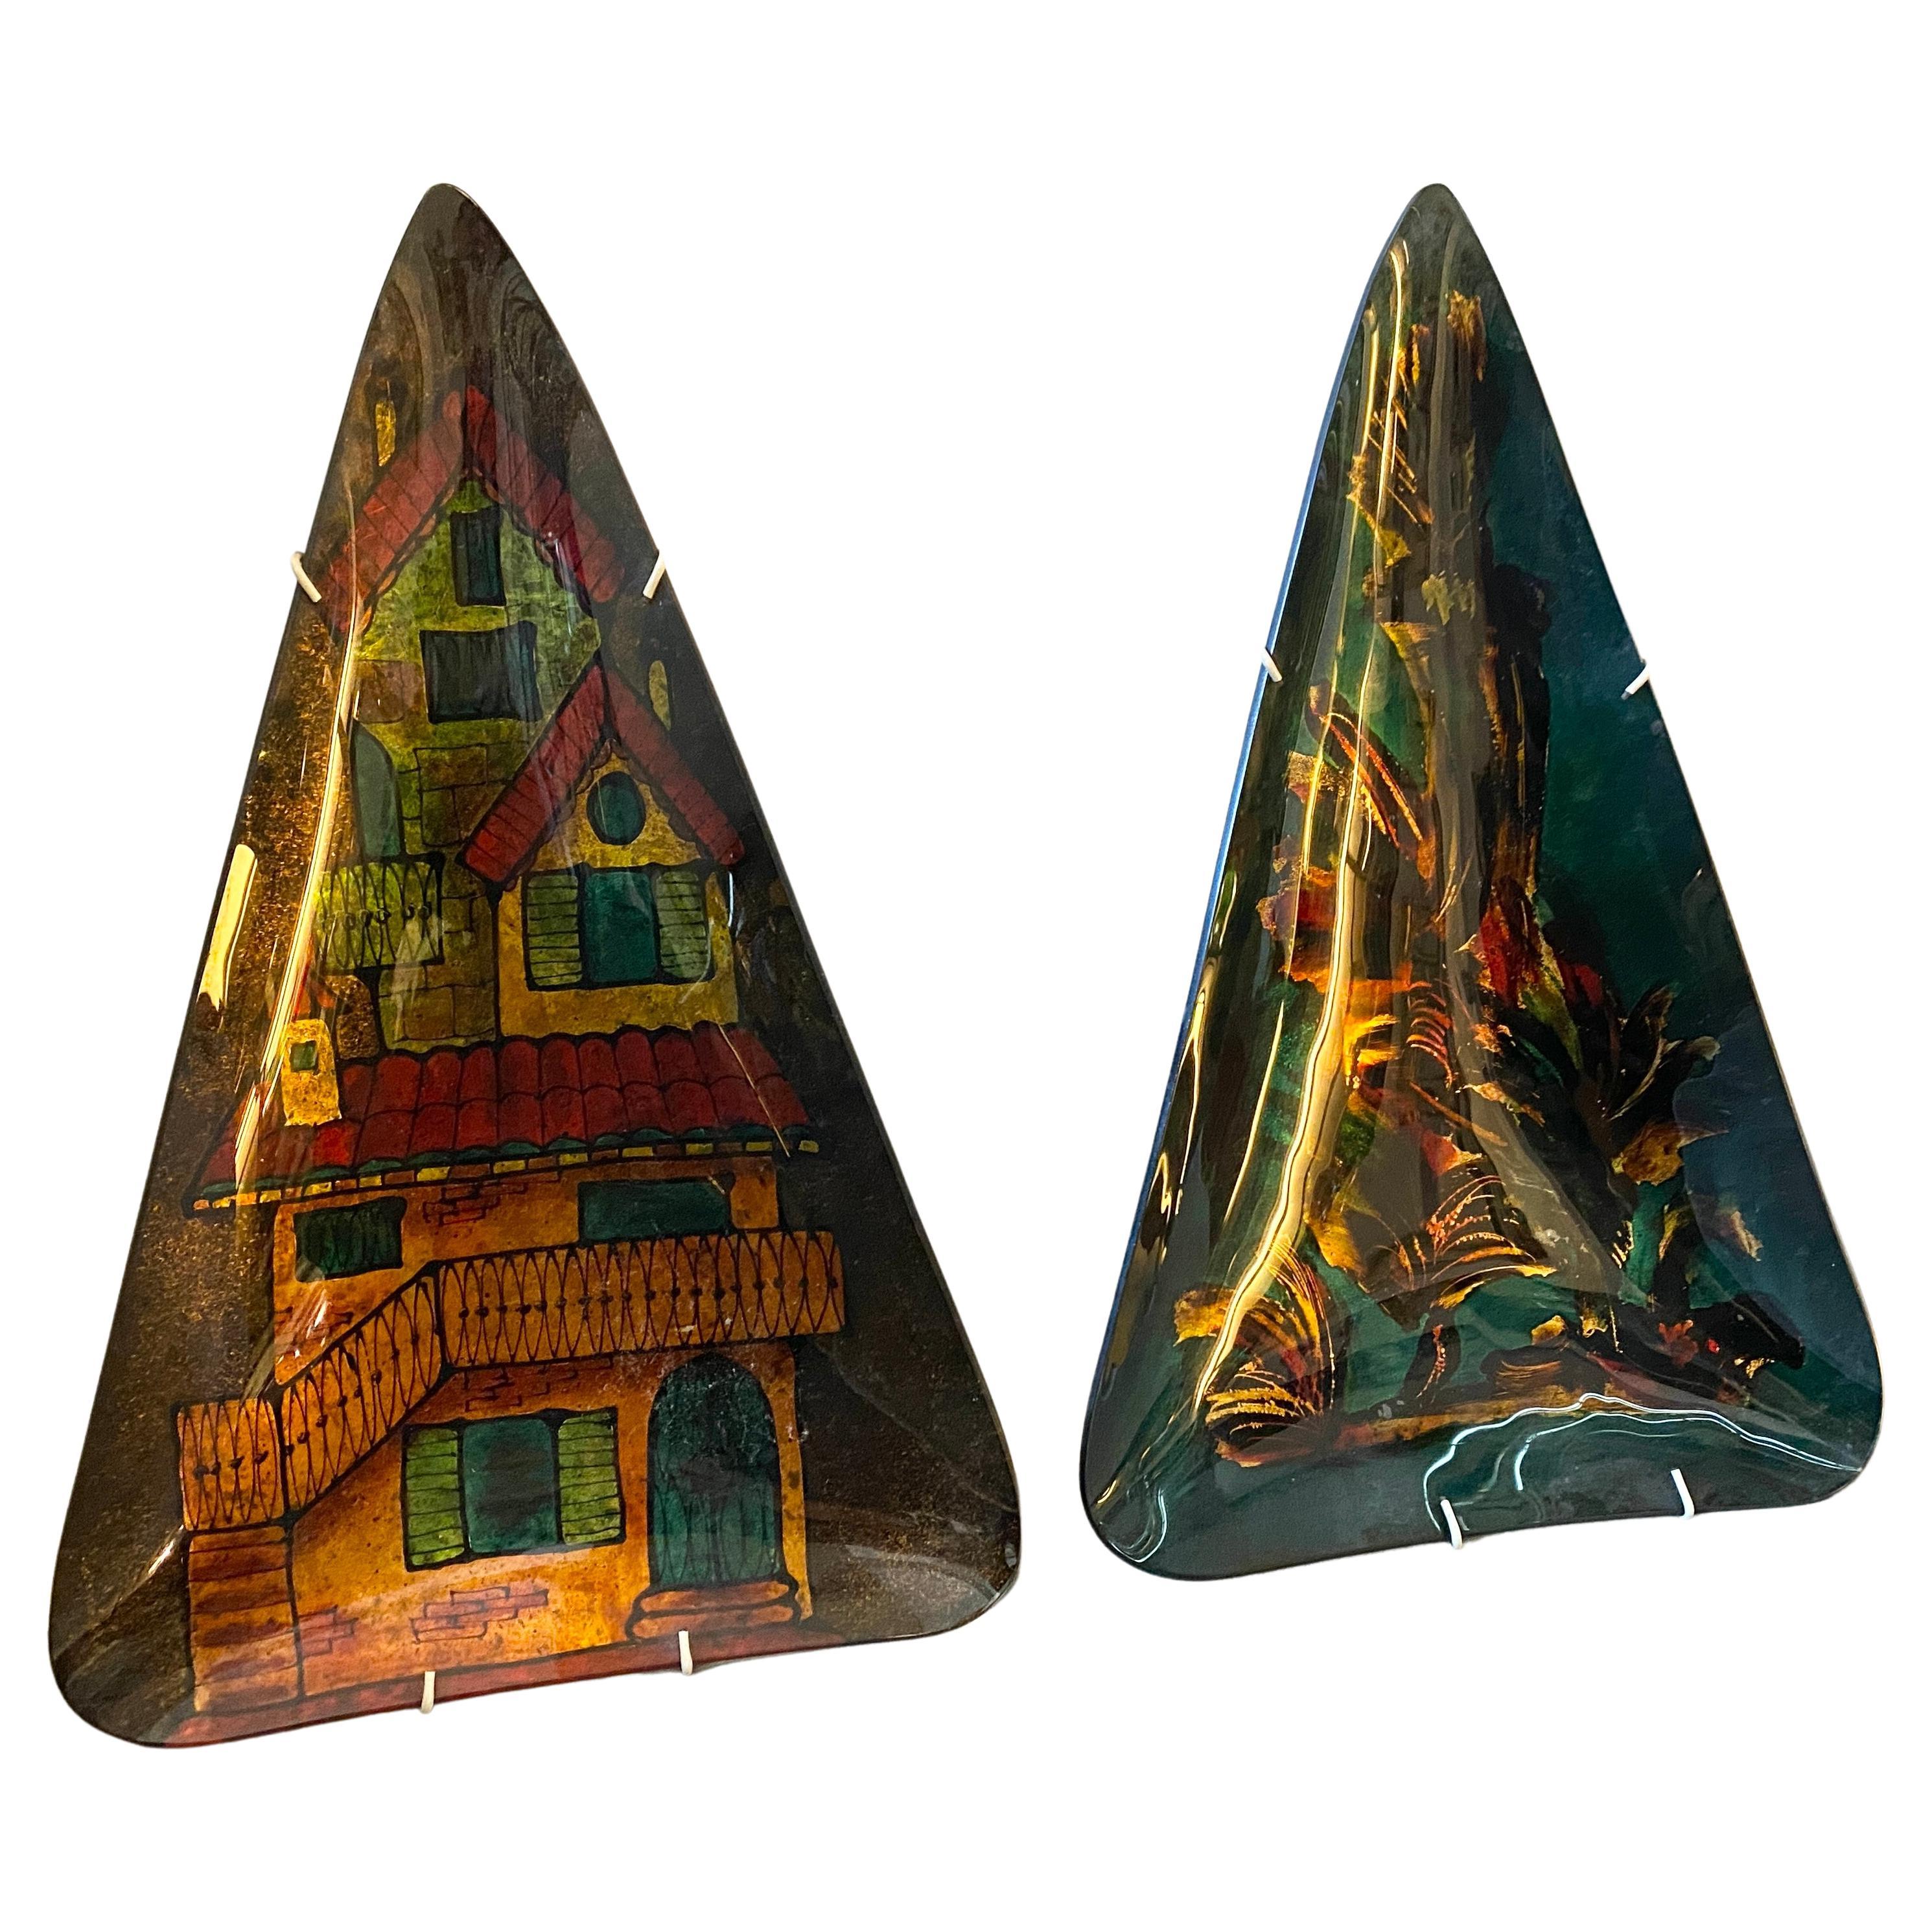 Two under enameled paintings on triangular mural glass plates manufactured in Italy in the Fifties. They are very nice Mid-Century Modern wall decorations and in perfect conditions.